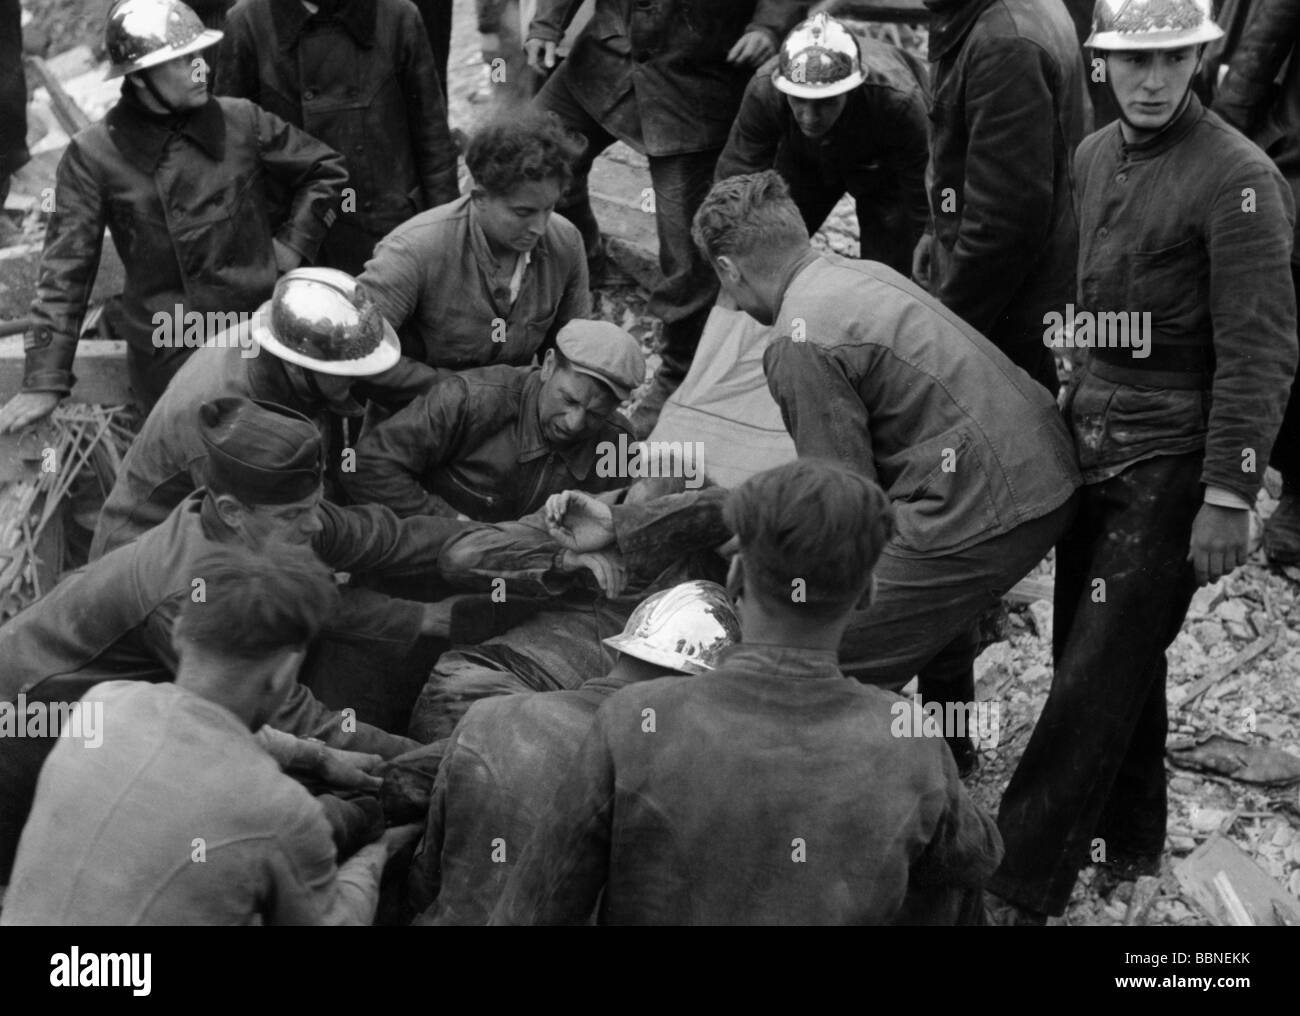 events, Second World War / WWII, aerial warfare, France 1942 / 1943, rescue of injured after a British air raid on Paris, 30.5.1942, 20th century, historic, historical, bomb war, victim, victims, fire brigade, wounded, civilians, evacuation, bombing attack, recovery, salvage, buried, blocked, entombed, trapped, RAF, Royal Air Force, Bomber Command, people, 1940s, Stock Photo